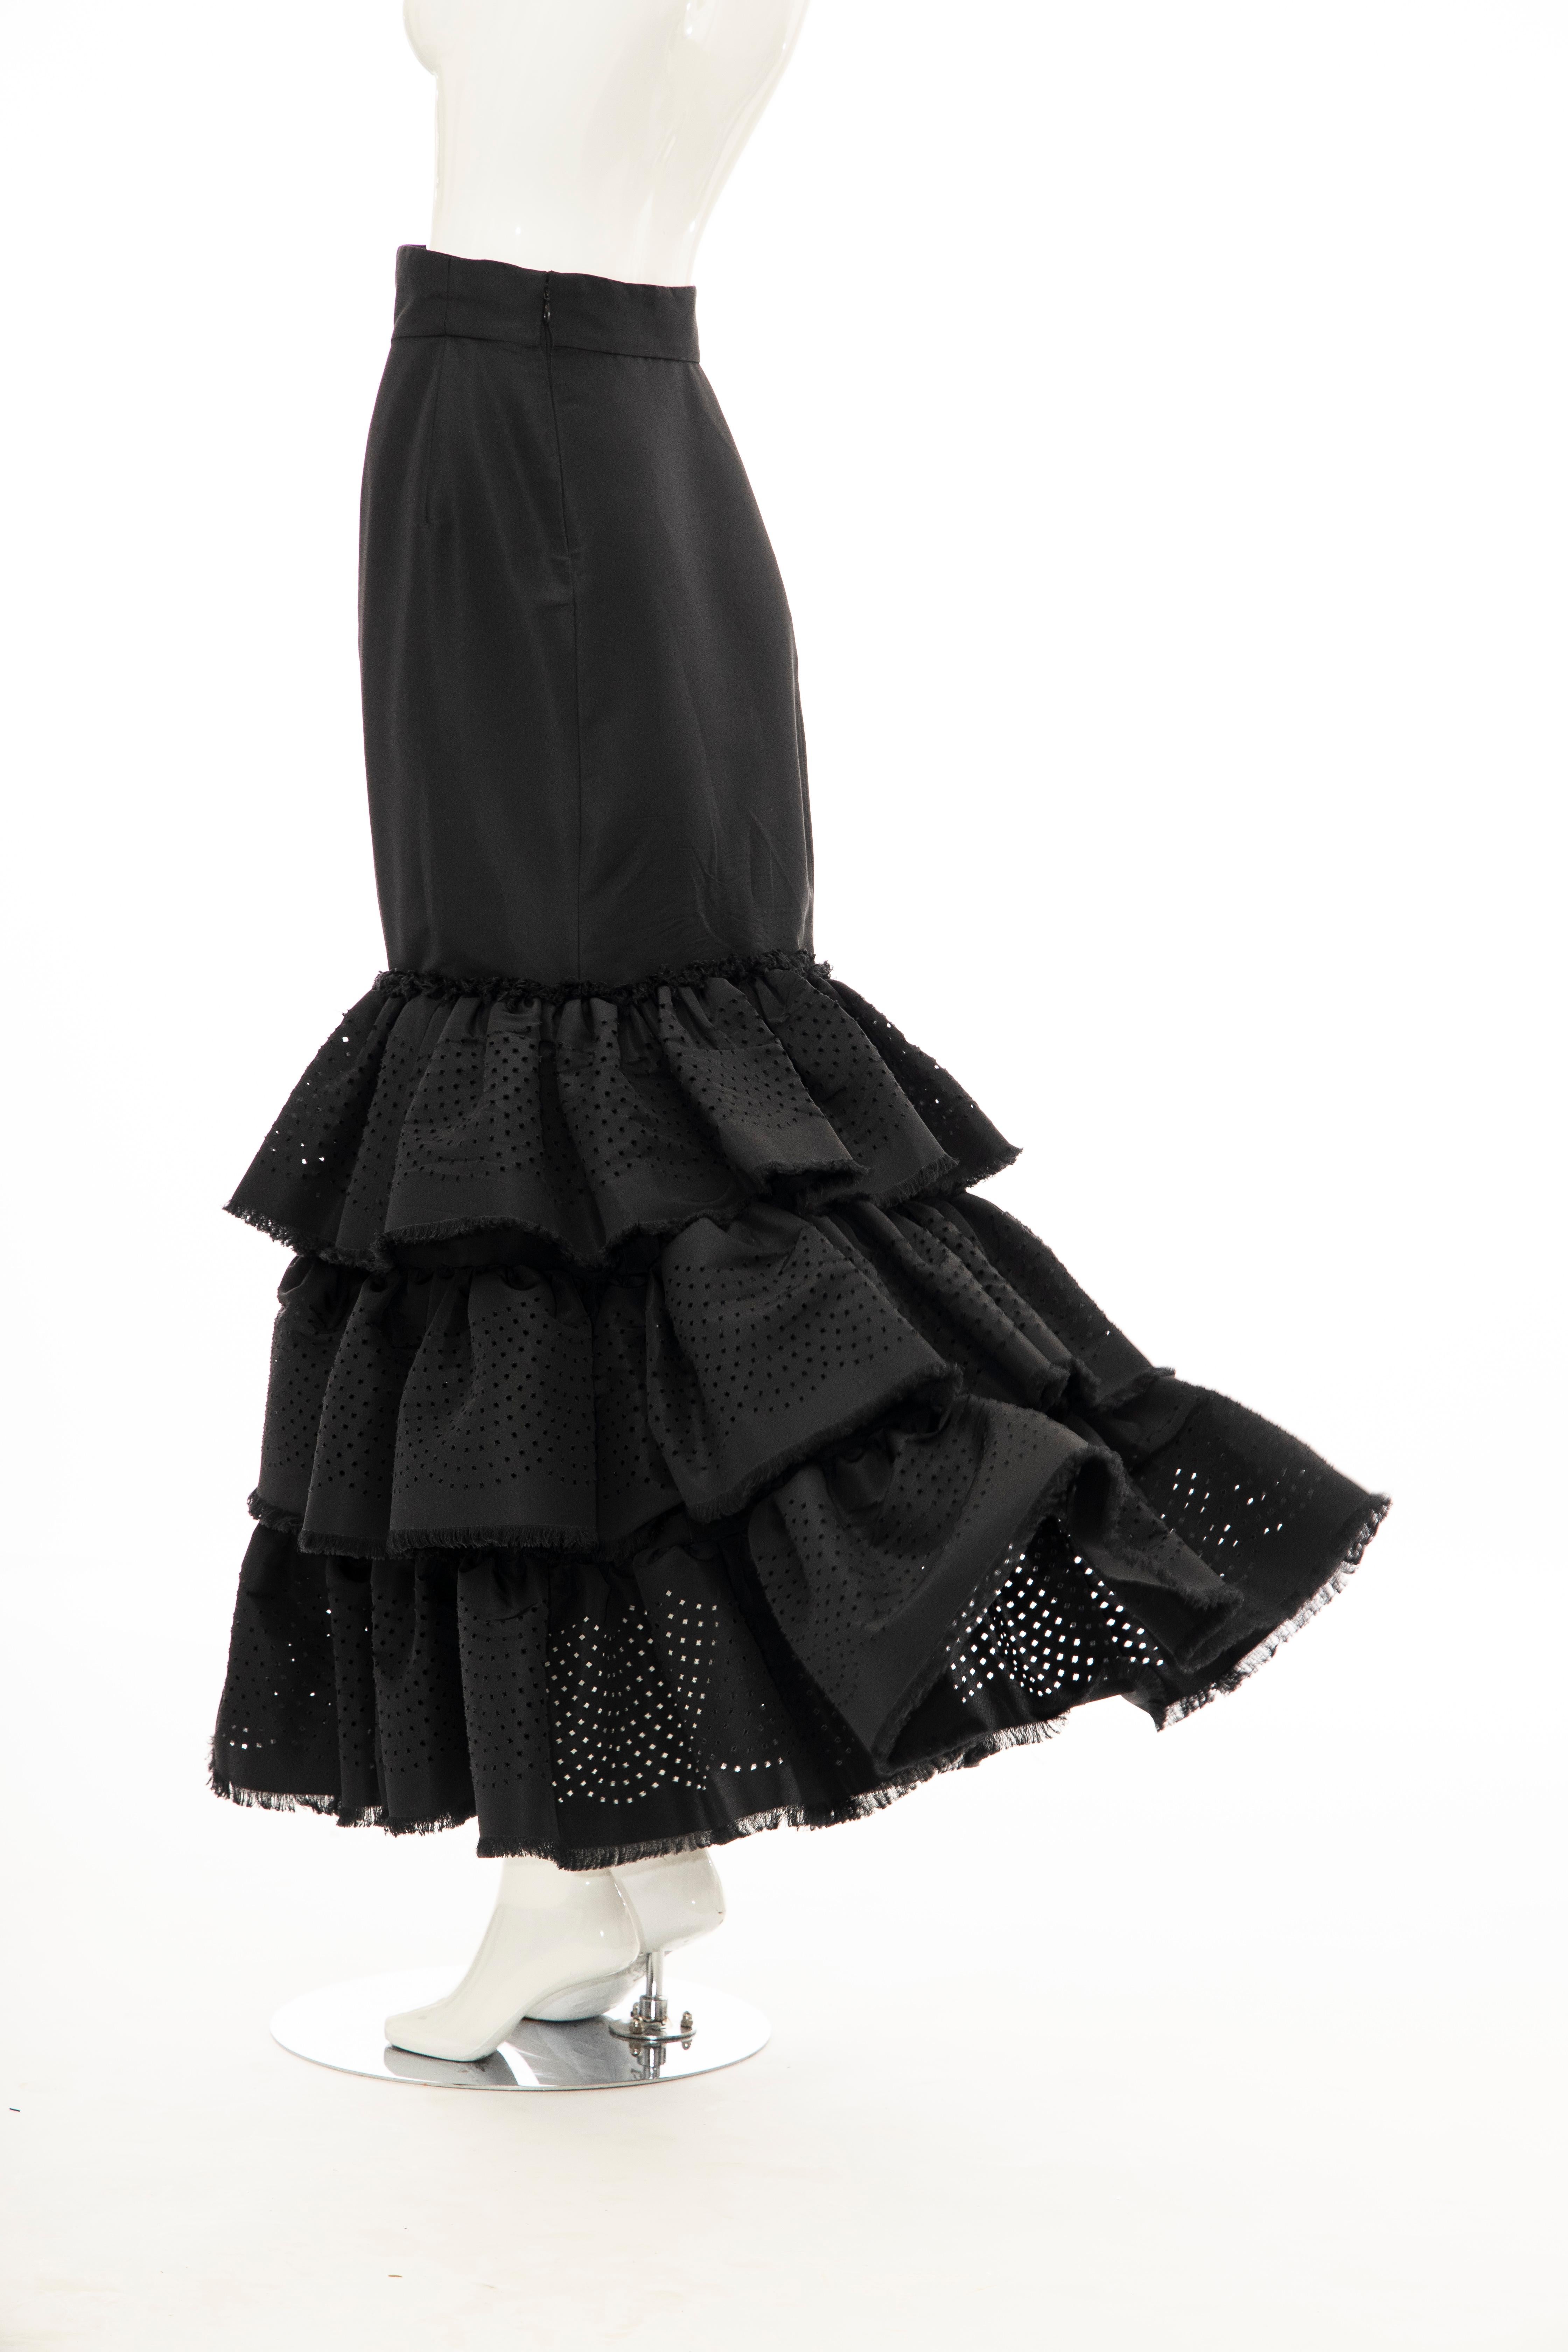 Oscar de la Renta Black Punched Silk Faille Evening Skirt, Fall 2001 In Excellent Condition For Sale In Cincinnati, OH